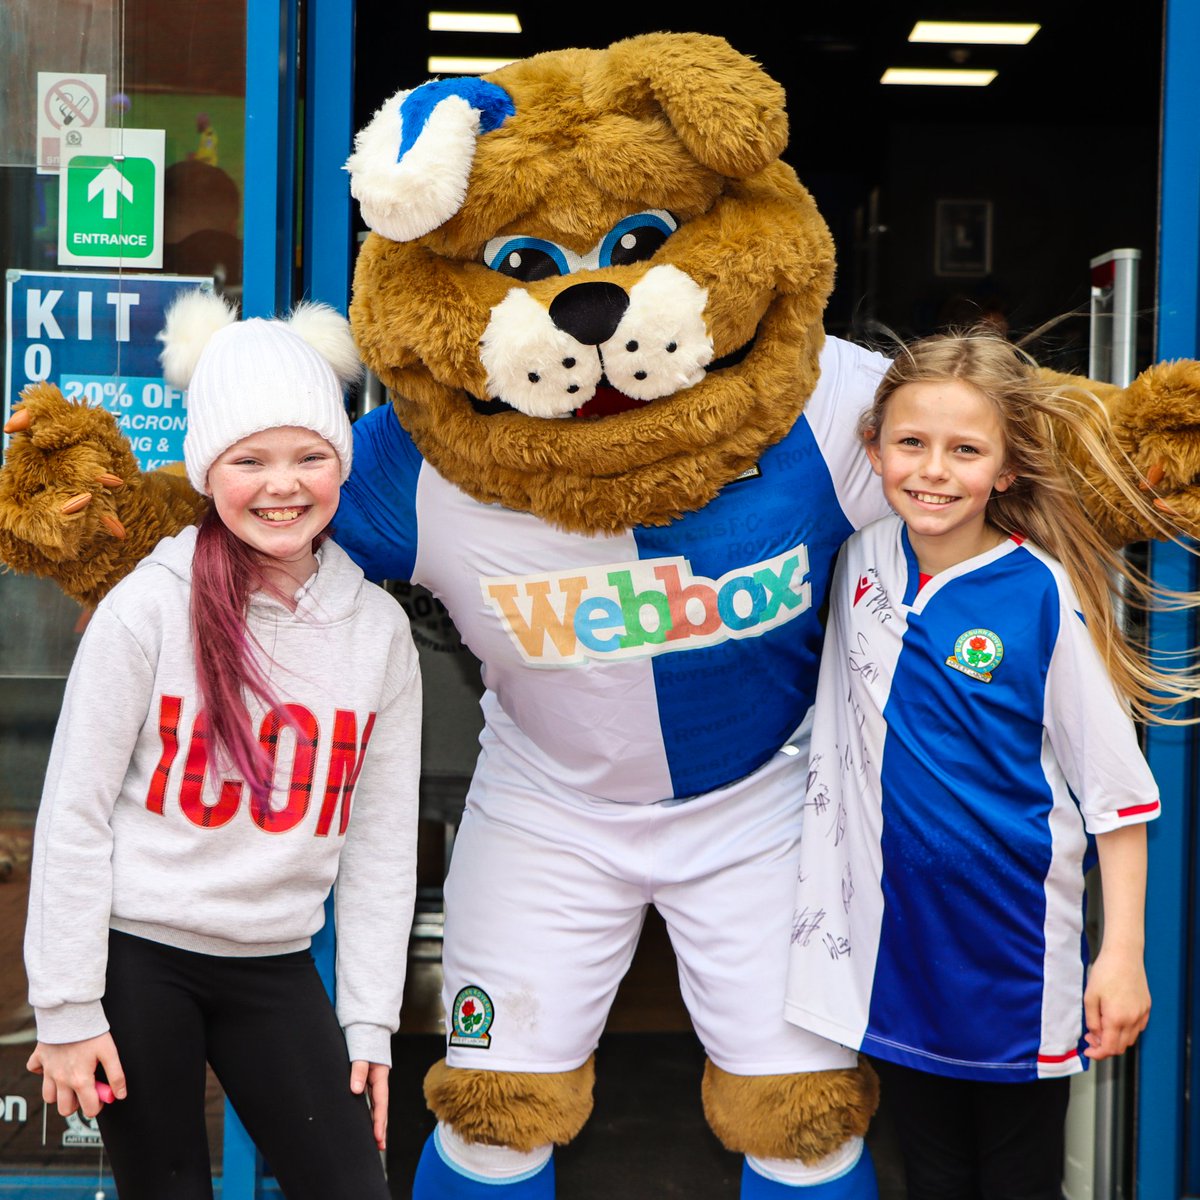 🐶 Rover wants to remind everyone that Under-12s can attend tomorrow's game for 𝗙𝗥𝗘𝗘 with a full-paying adult ticket or season ticket holder! 🎟️ Get your tickets: bit.ly/rovers-tix @WebboxPetFood | #Rovers 🔵⚪️